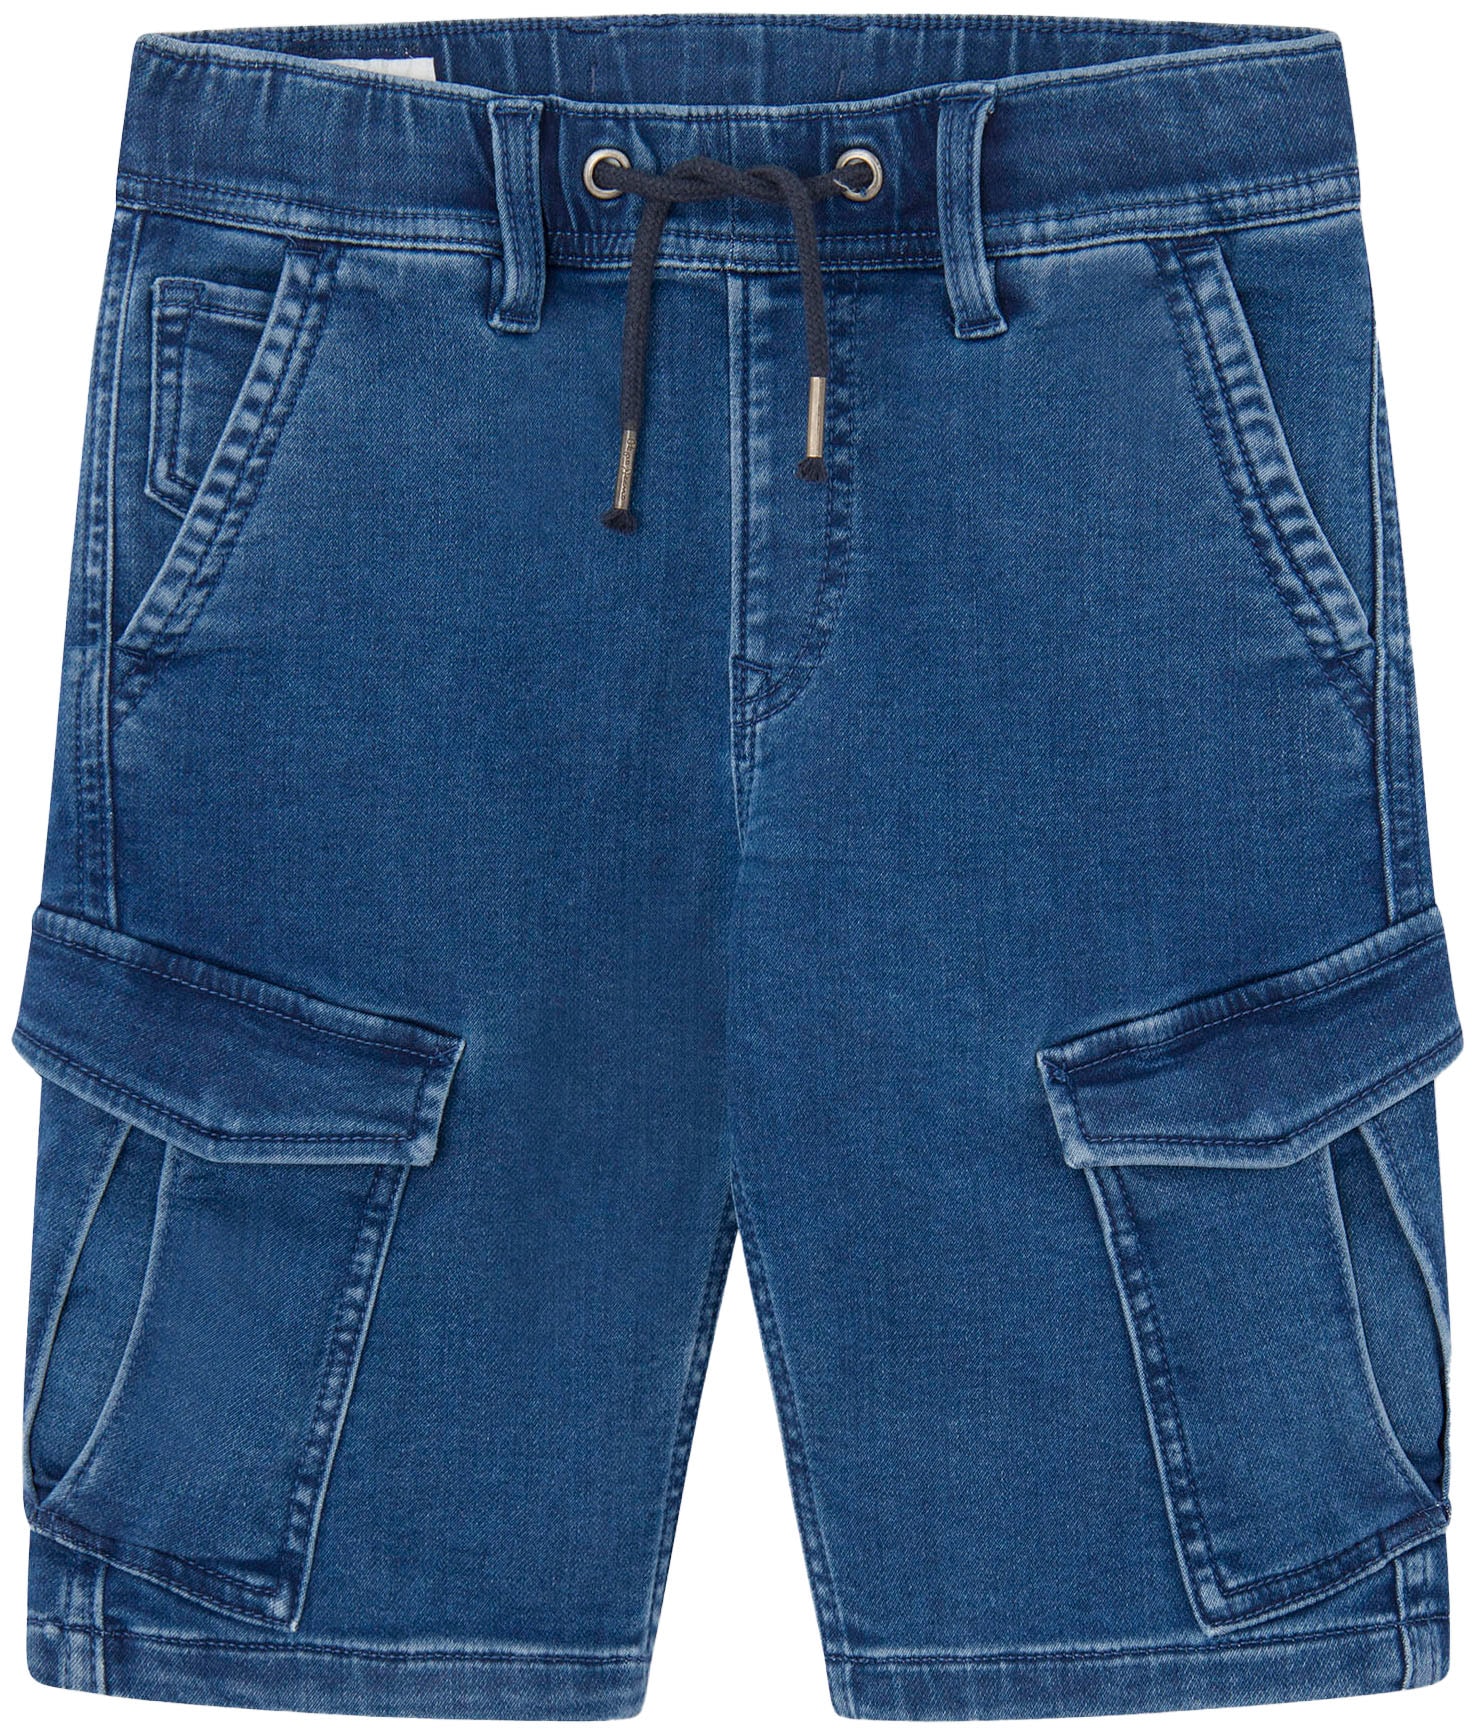 Pepe Jeans Jeansshorts »RELAXED CARGO« von Pepe Jeans